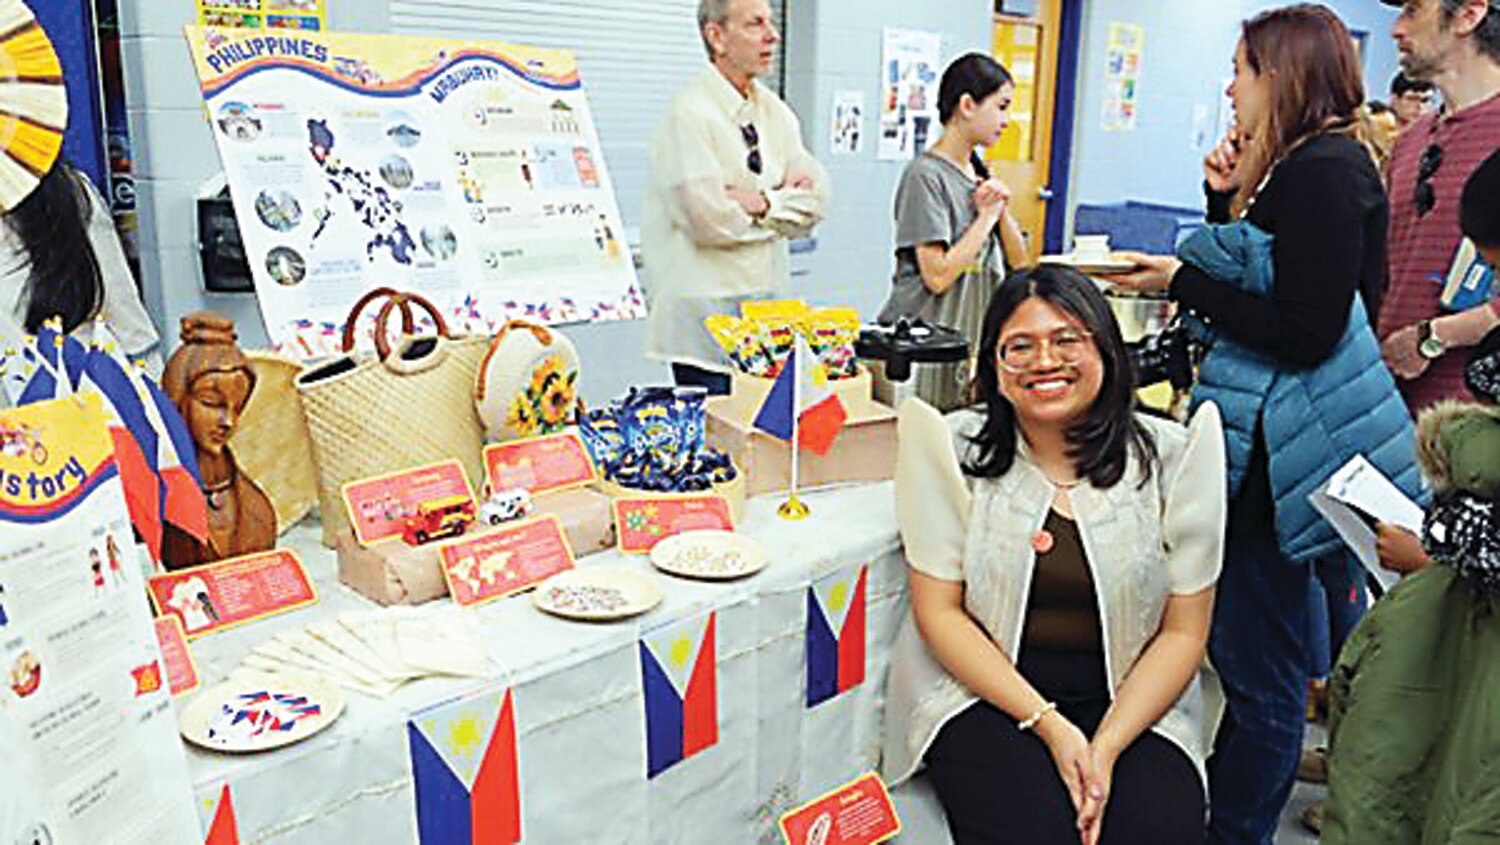 New Hope-Solebury senior Arianne Aludino and her family hosted a table showcasing her Filipino heritage.